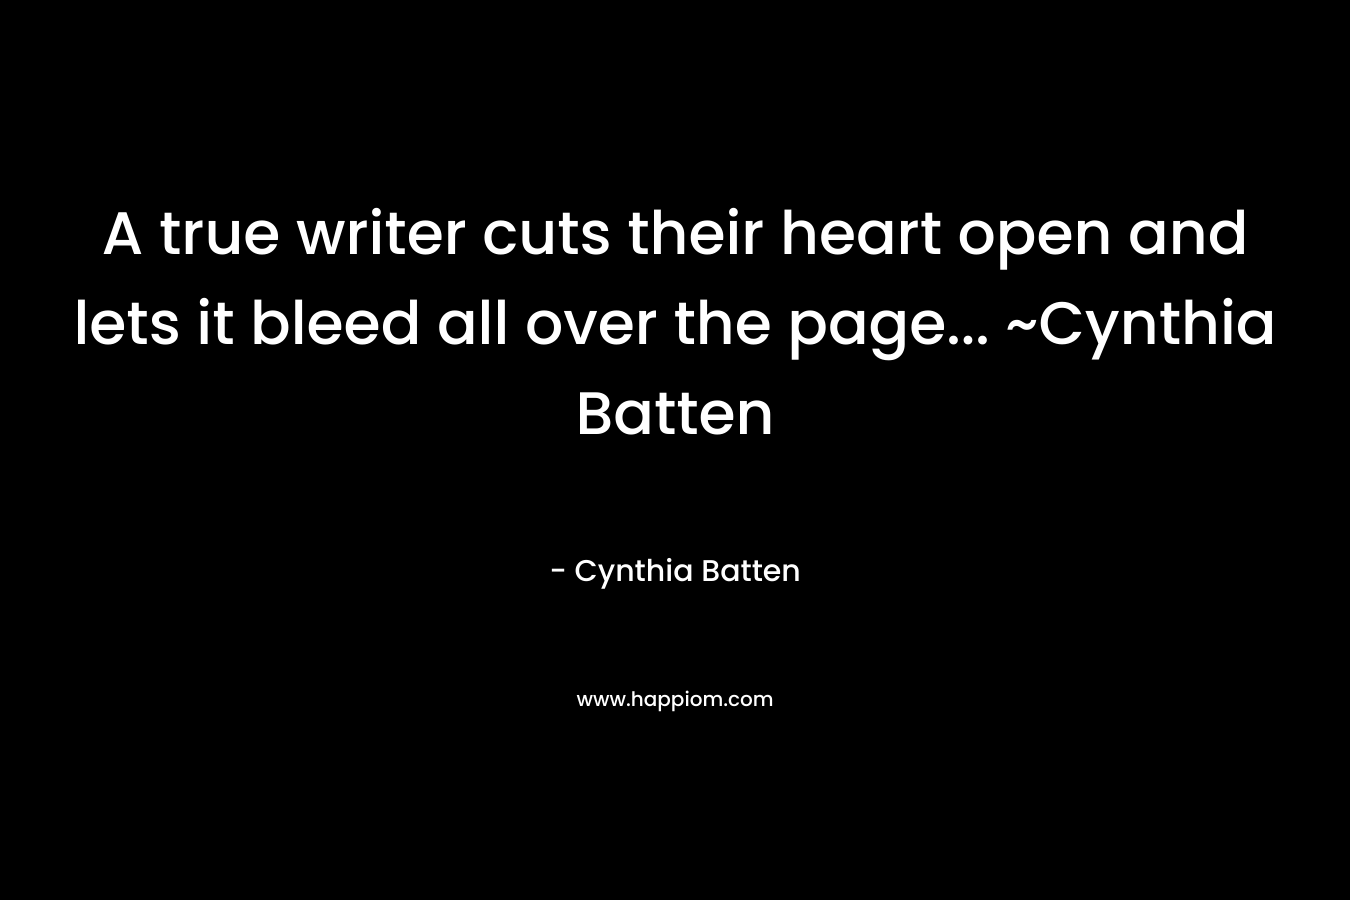 A true writer cuts their heart open and lets it bleed all over the page... ~Cynthia Batten